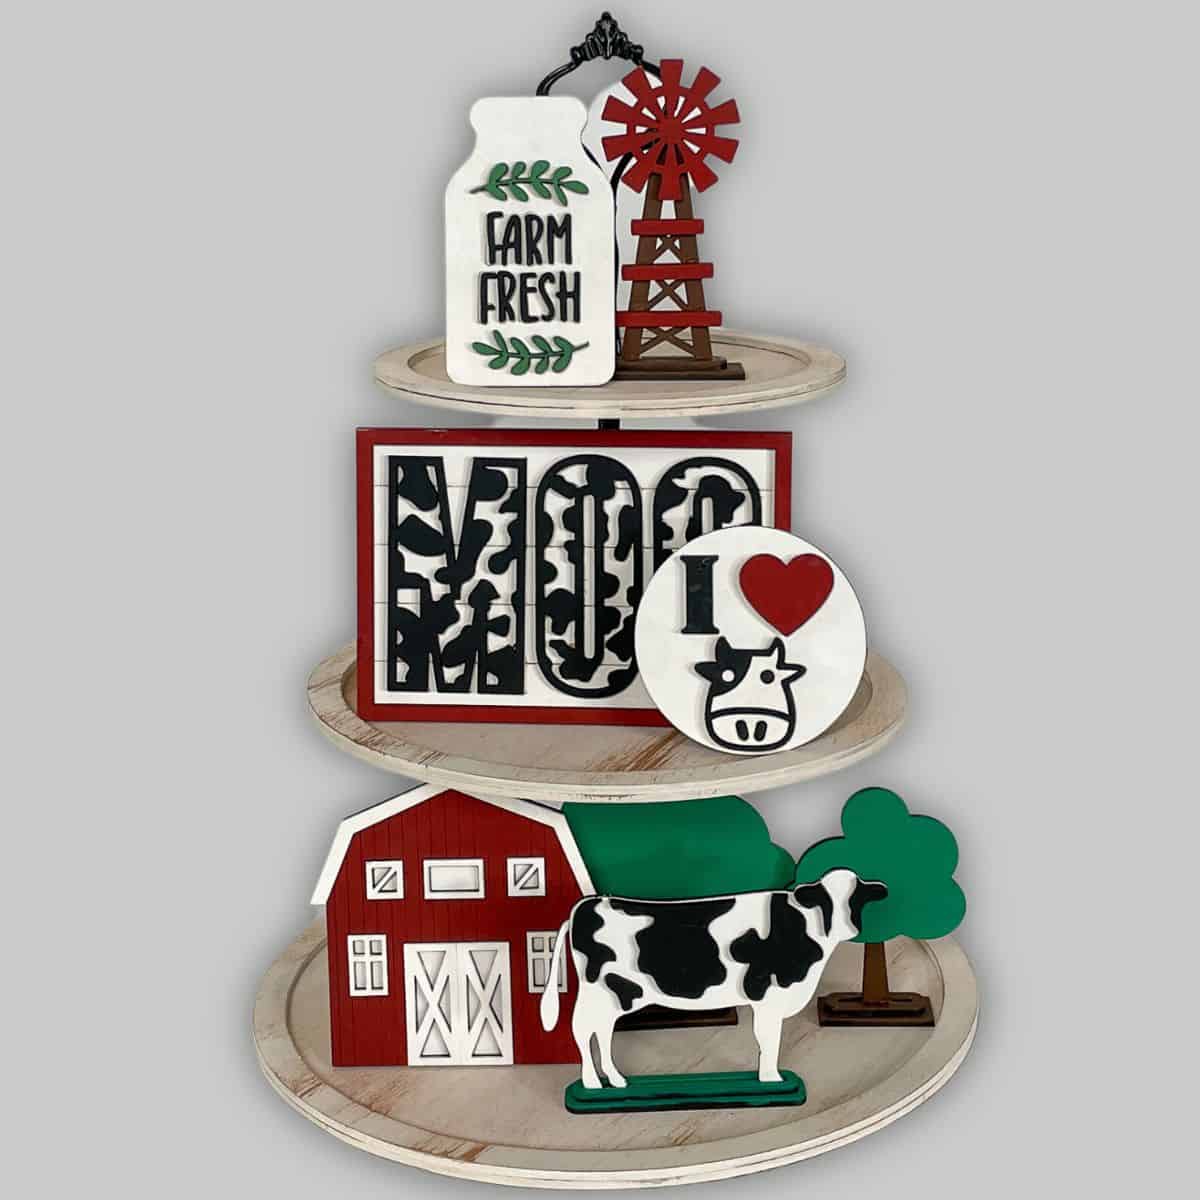 Laser Cut File Bundle: 8 decor pieces that are cow themed - barn, silo, milking can, Moo sign, I heart cows, barn, cow, and two trees.